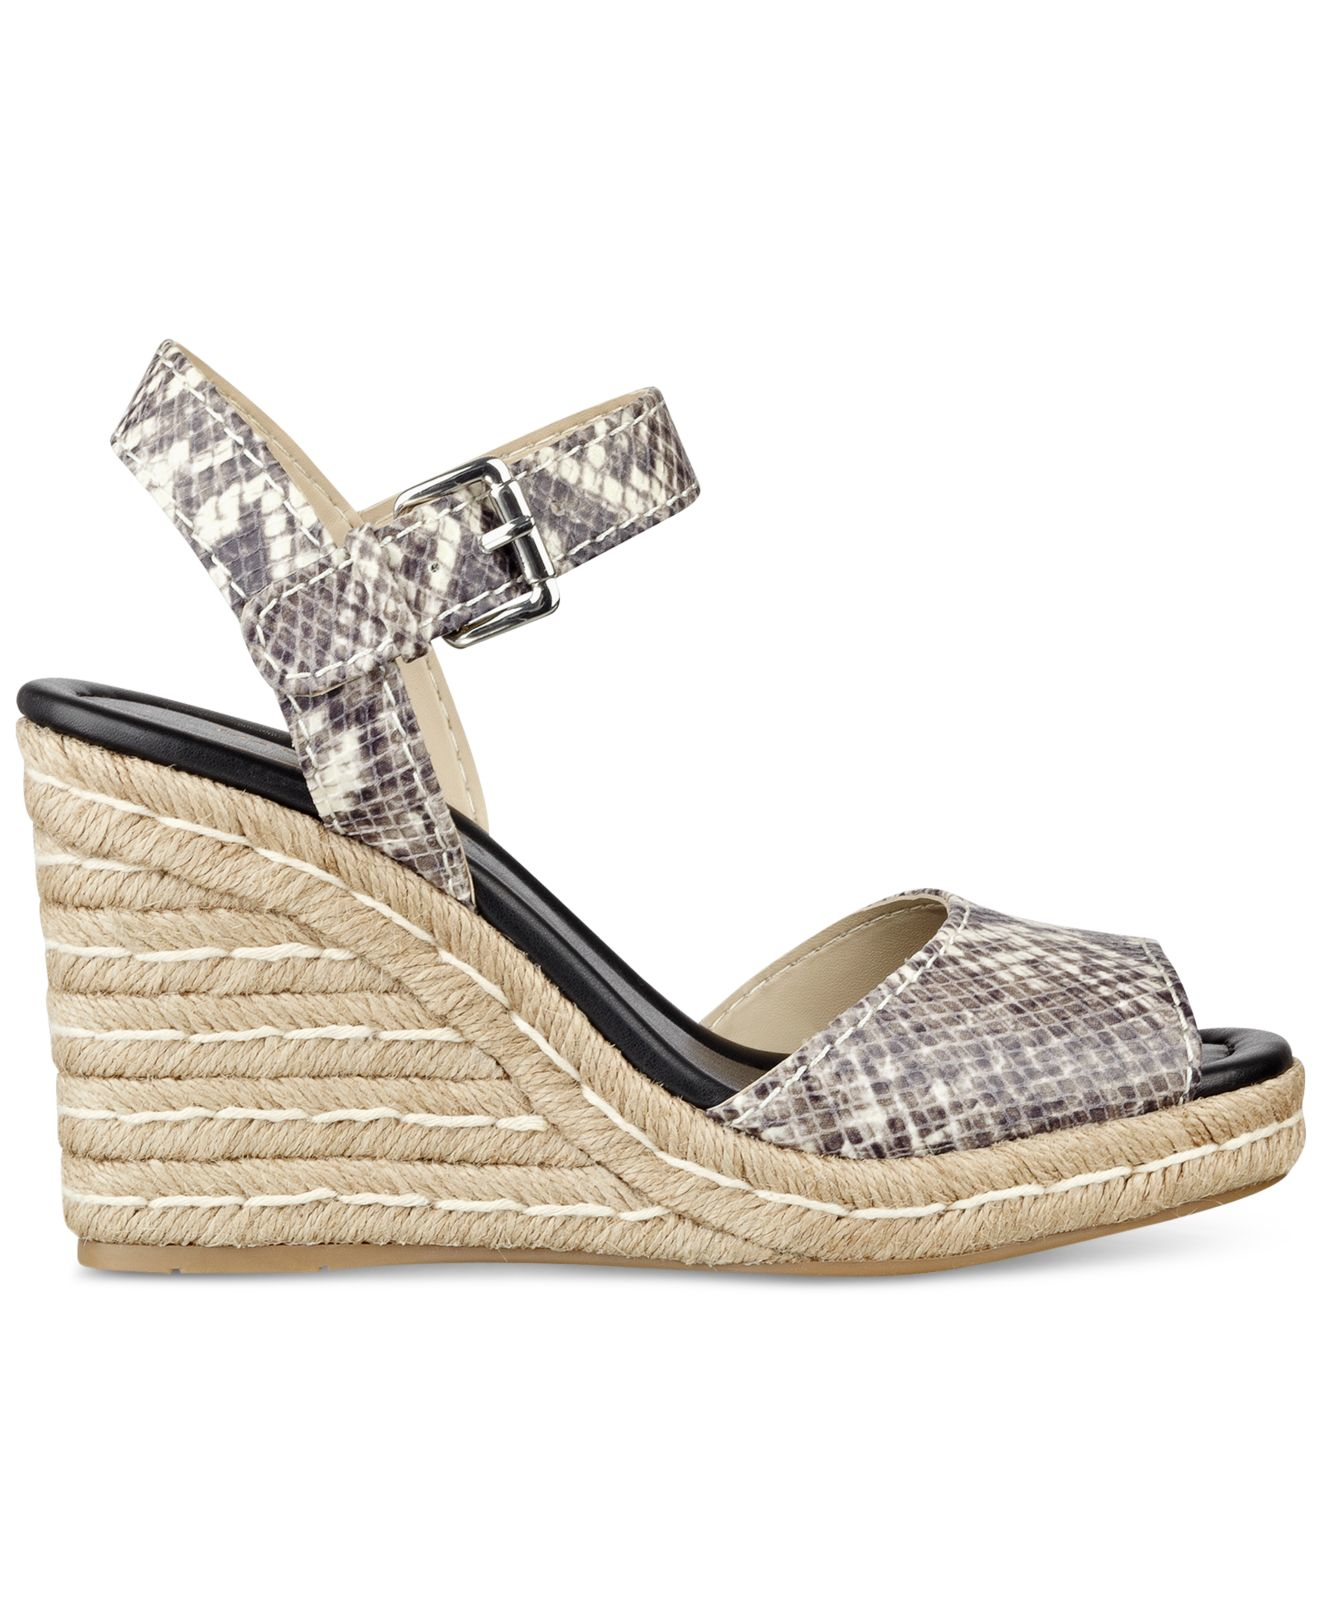 Lyst Marc fisher Maiseey Espadrille Wedge Sandals in Gray